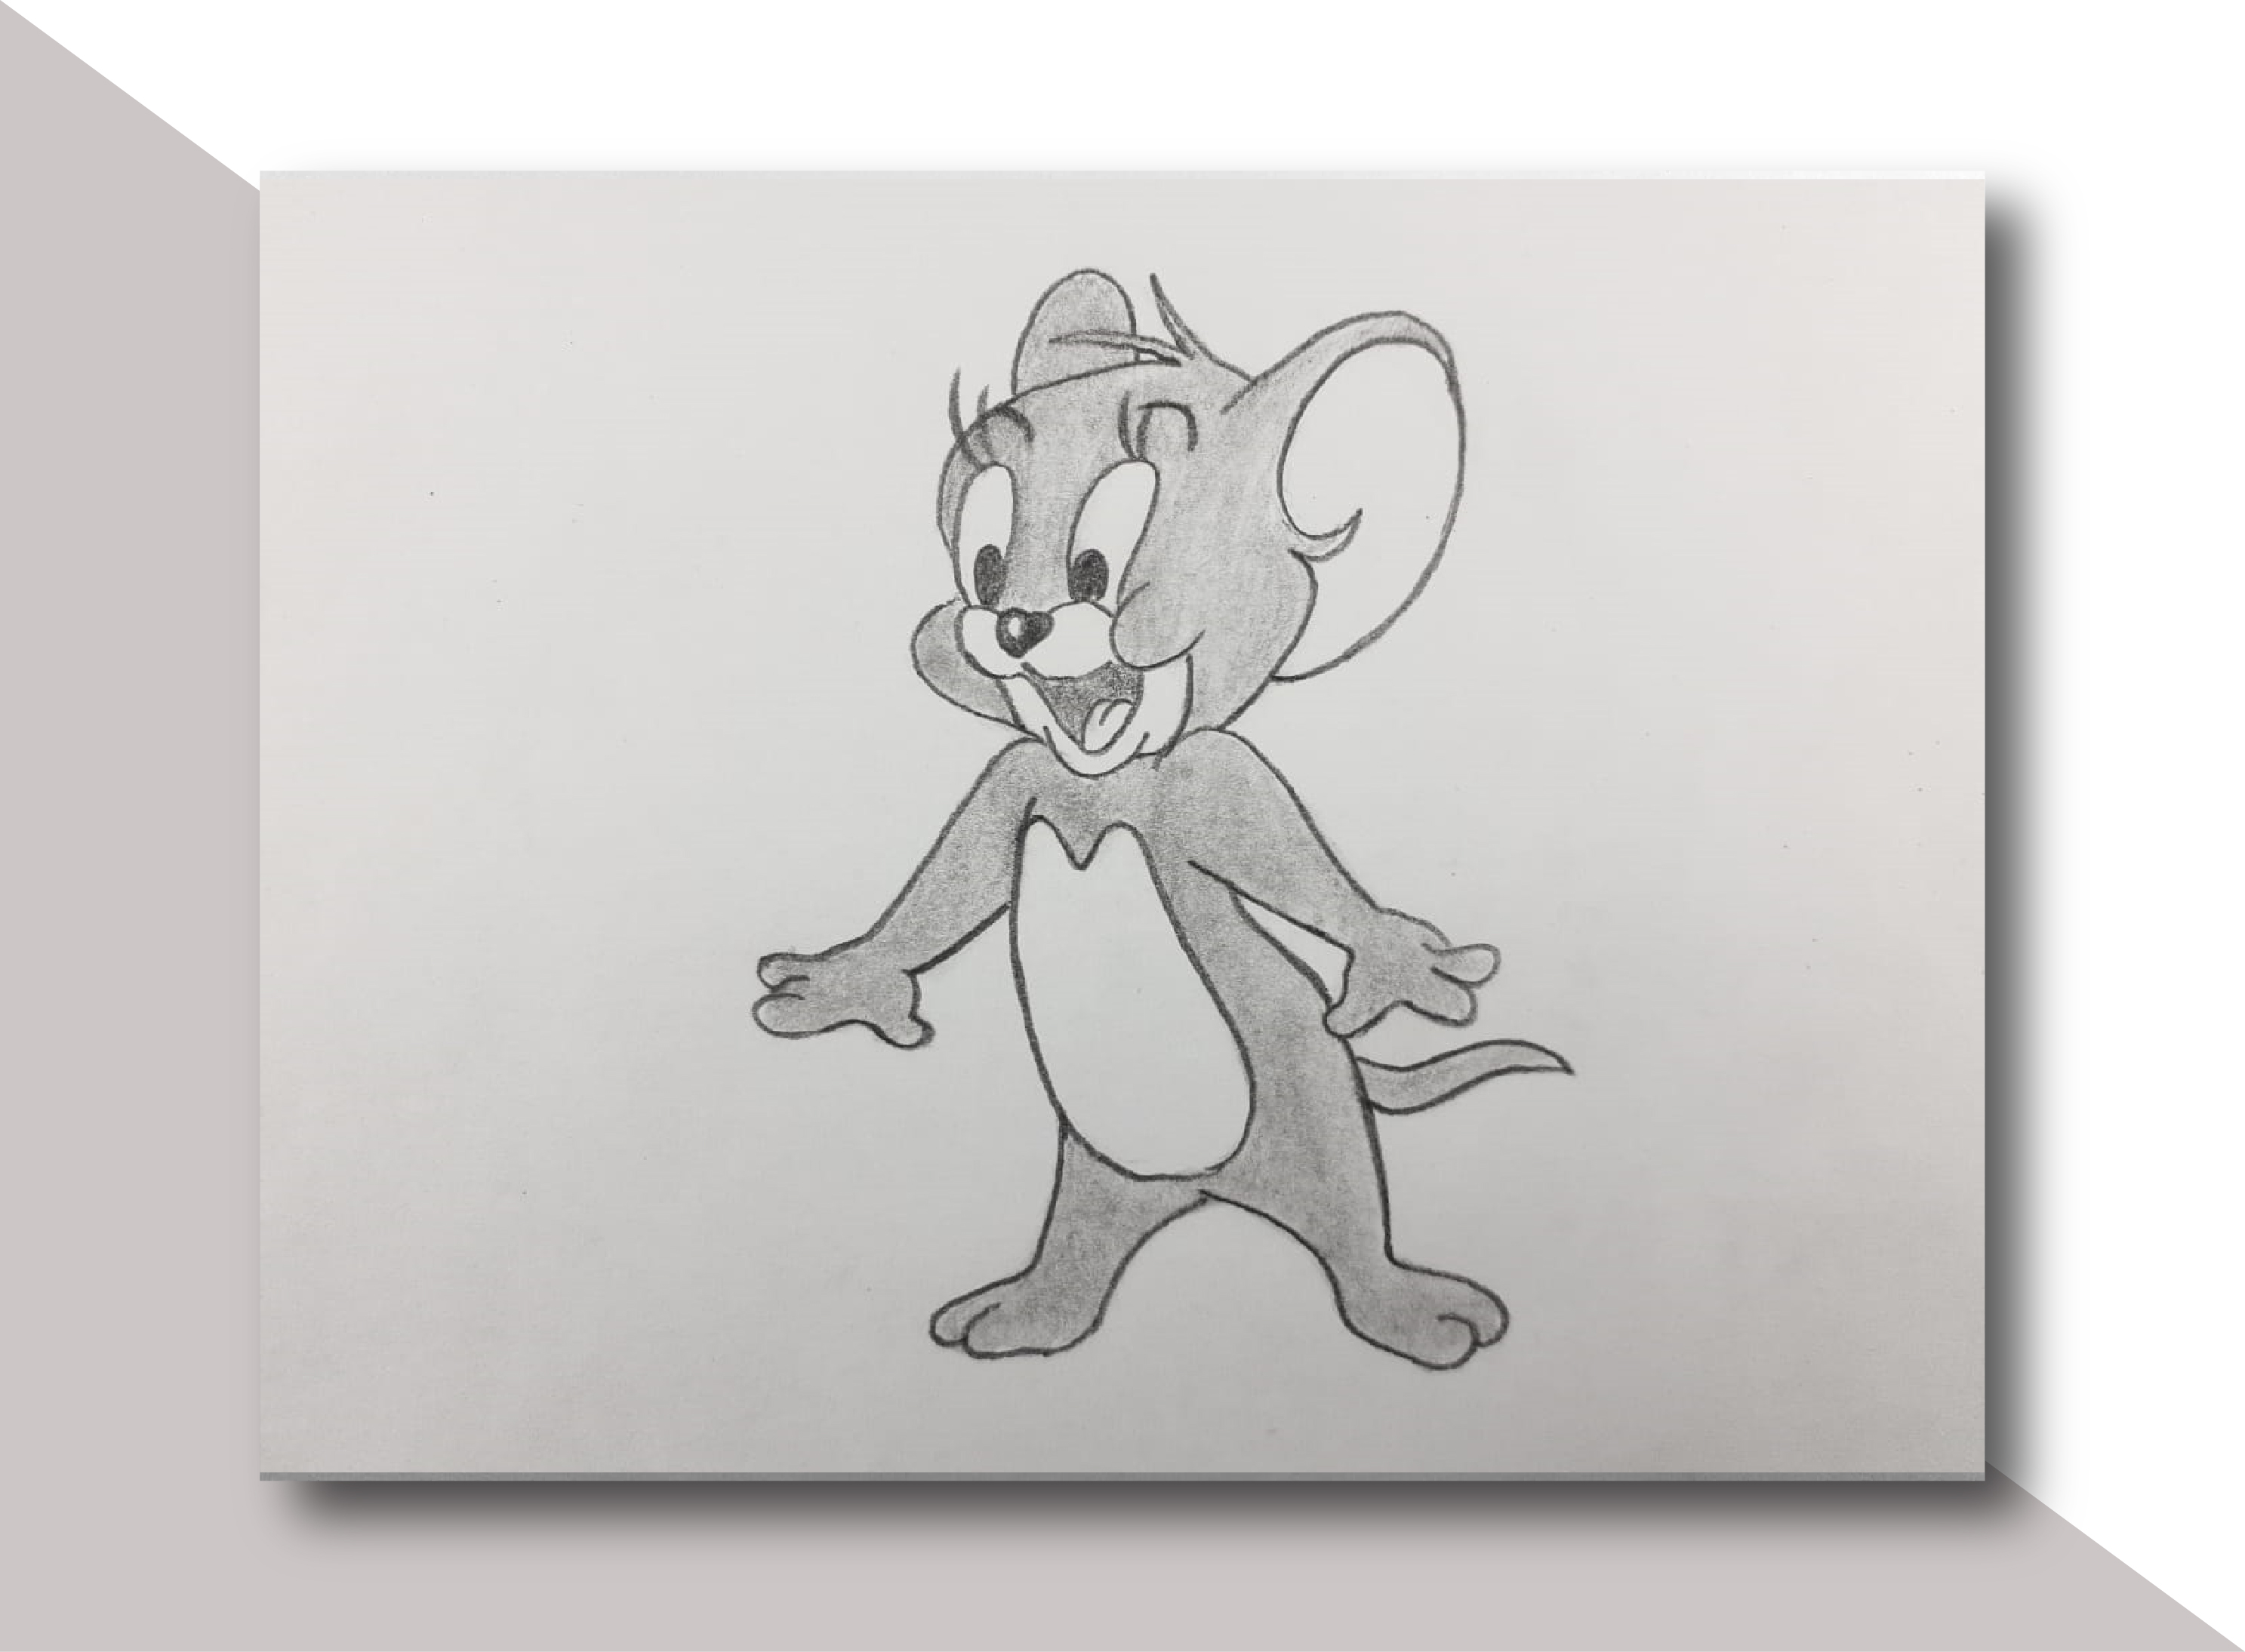 Entries of all participants of Drawing competition for Kids - Draw Tom and  Jerry